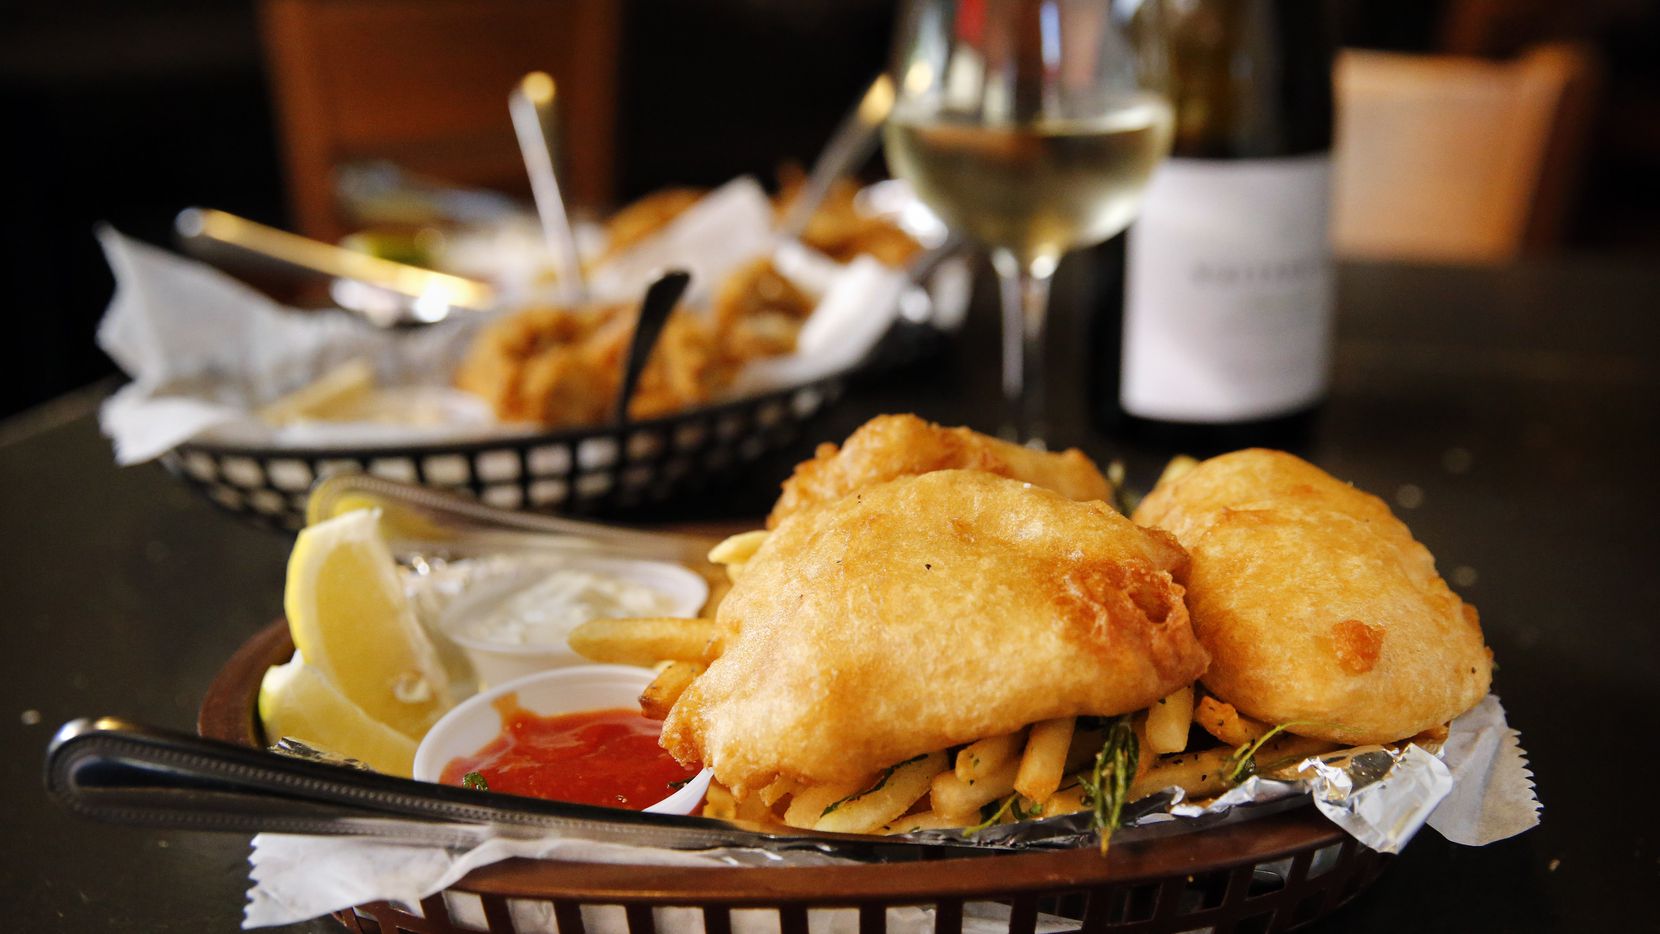 Fish & chips was paired with wines during The Dallas Morning News wine panel tasting at 20 Feet Seafood on Peavy Rd. in Dallas, Tuesday, September 17, 2019. (Tom Fox/The Dallas Morning News)